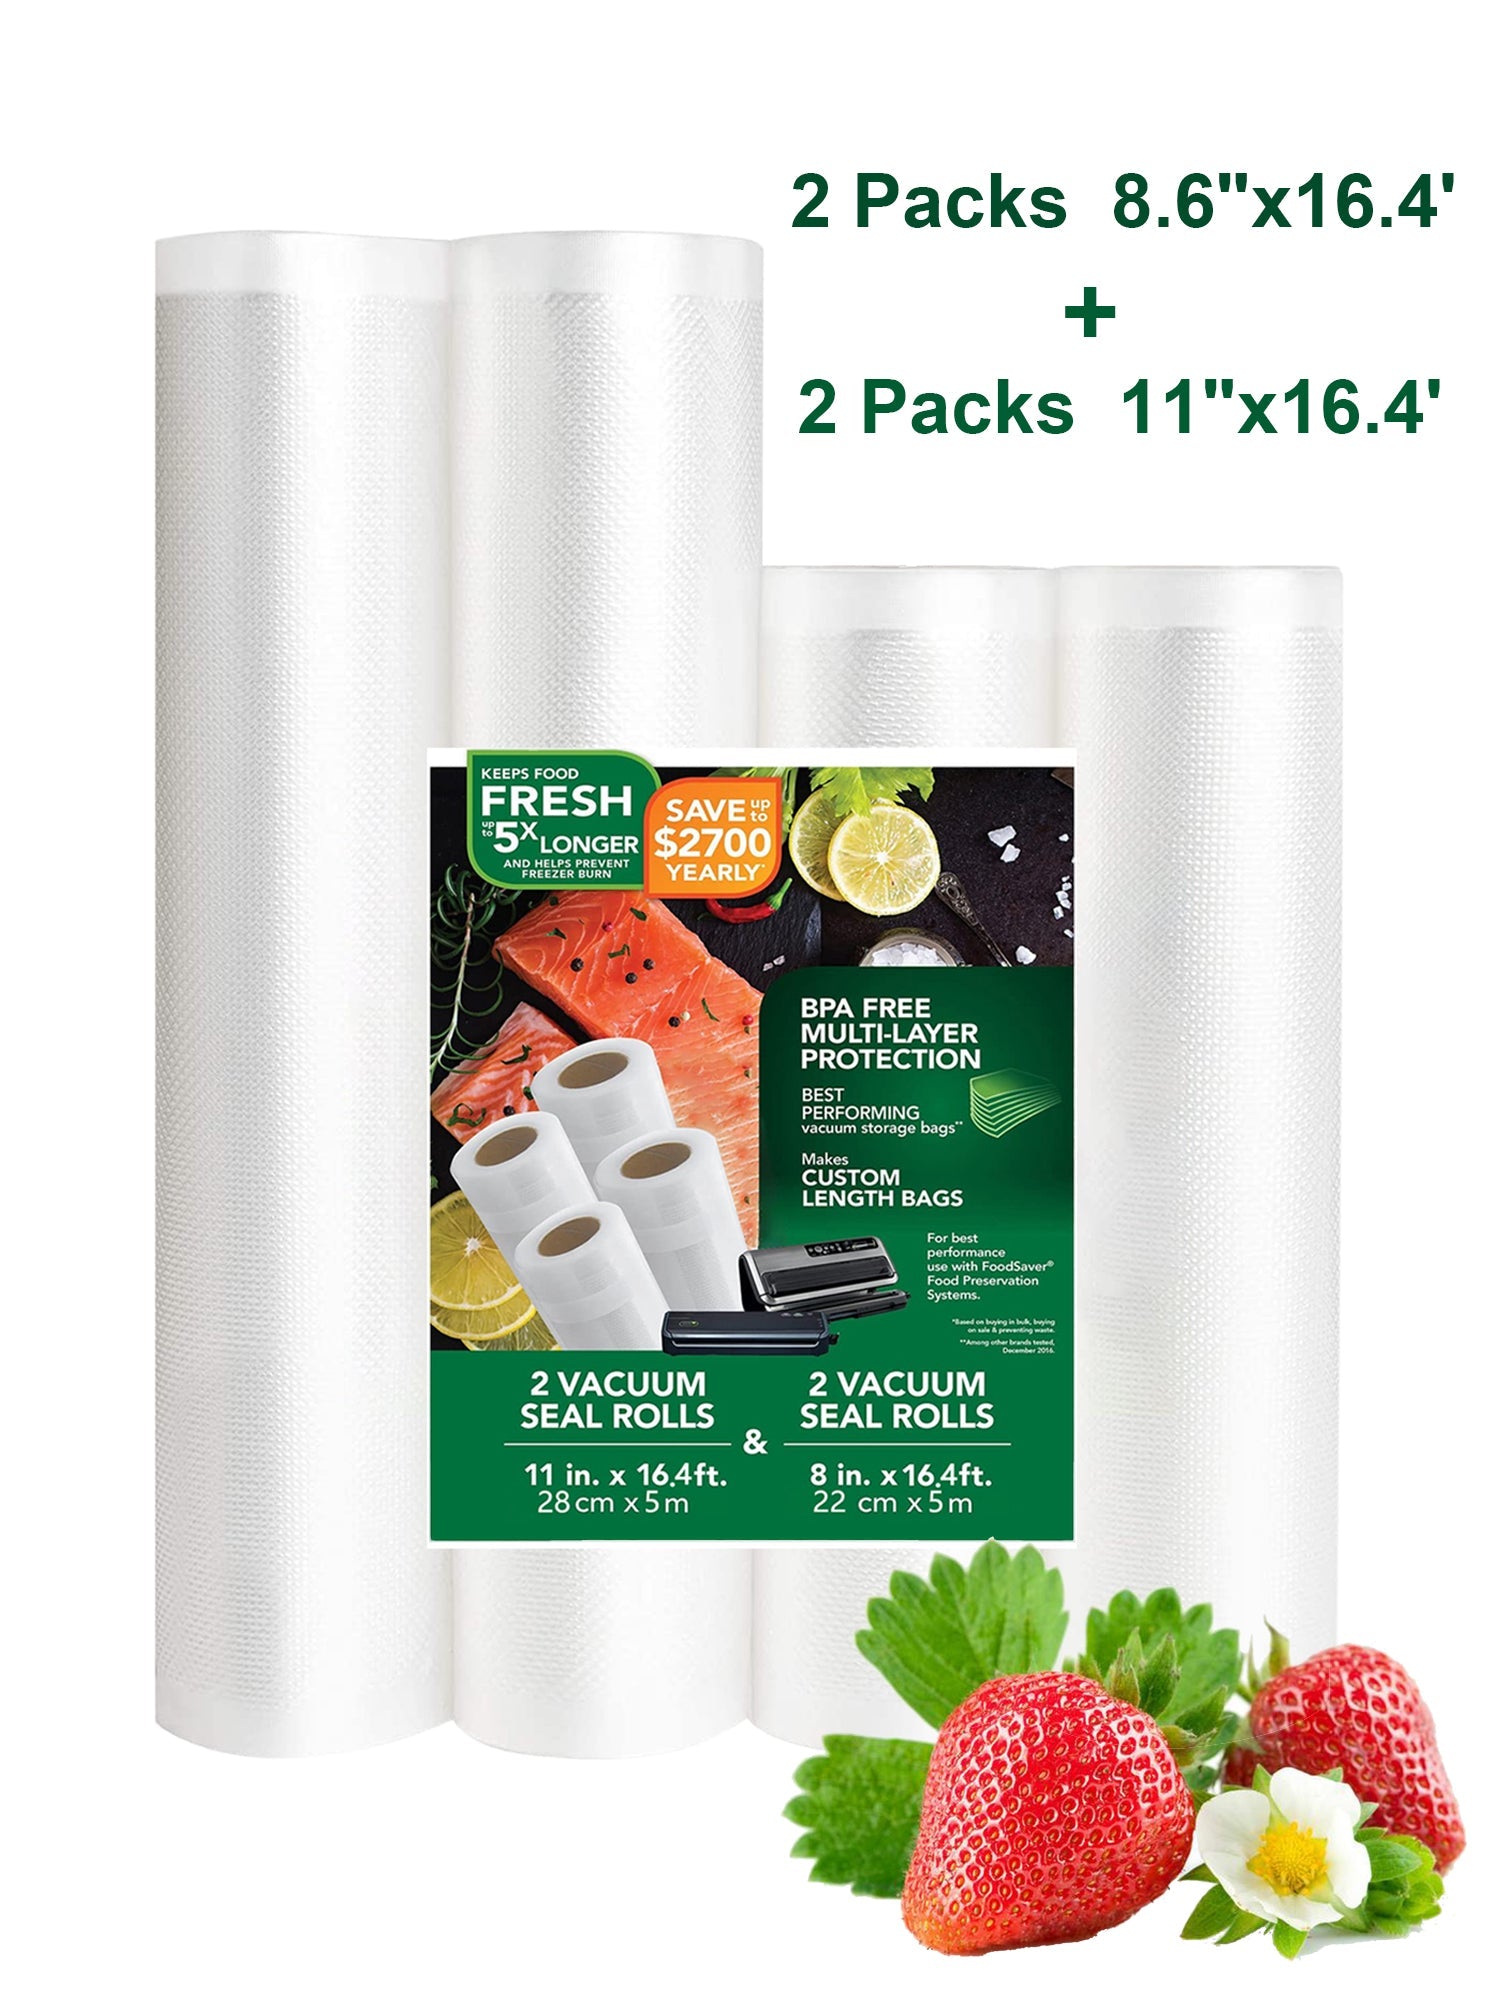 SUGIFT Vacuum Sealer Bags ,4 Rolls, 2 packs 8.6"x16.4 & 2 packs 11"x16.4 for Food Saver, Seal a Meal, Weston. Commercial Grade, BPA Free, Heavy Duty, Great for vac storage, Meal Prep or Sous Vide